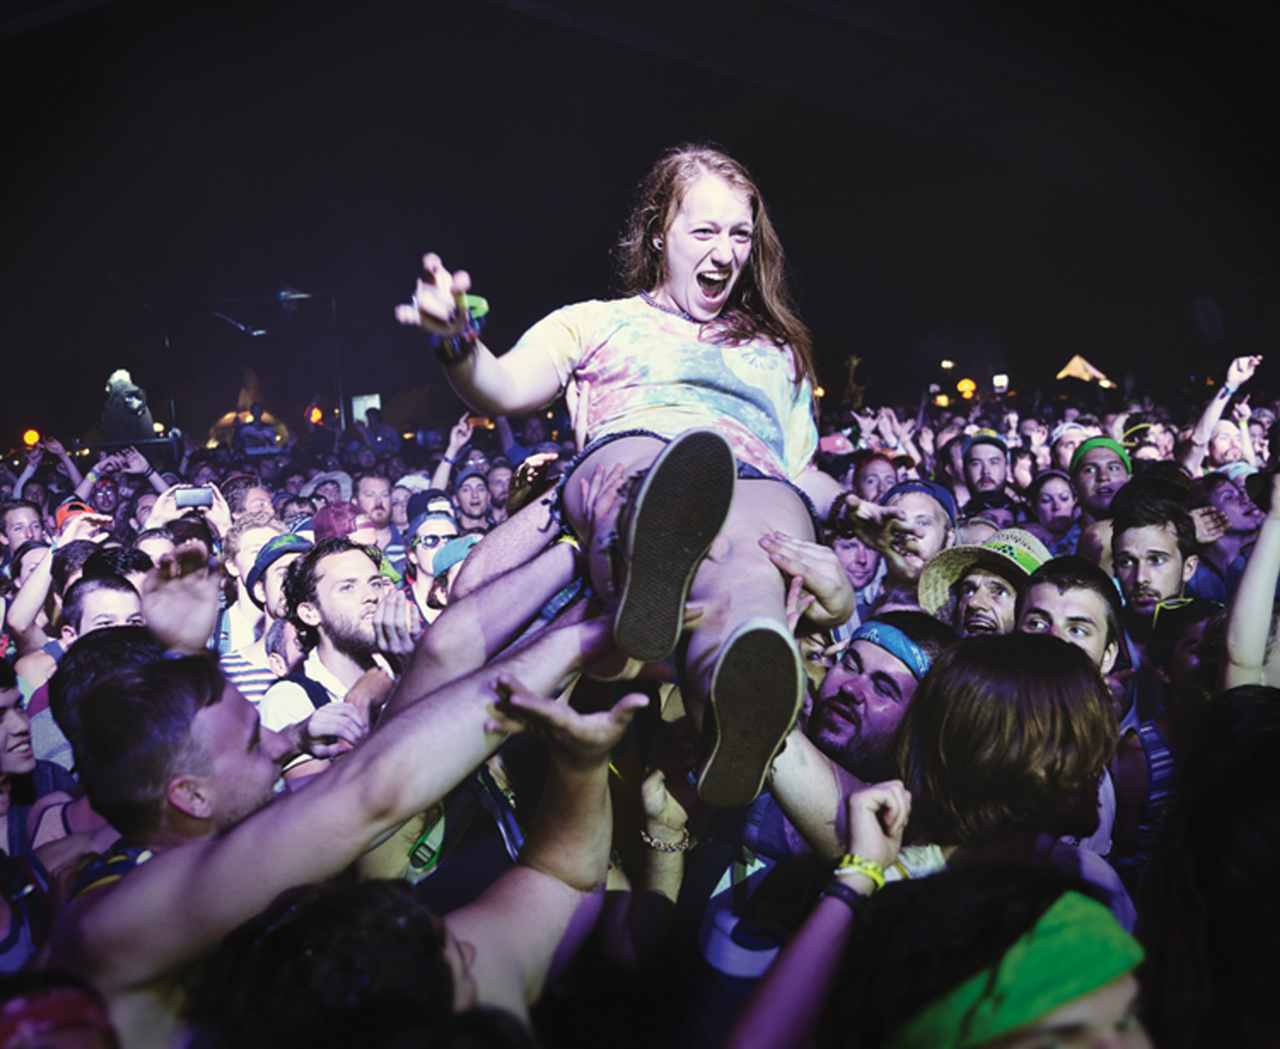 Photos in 2014: Scenes from concerts and music festivals